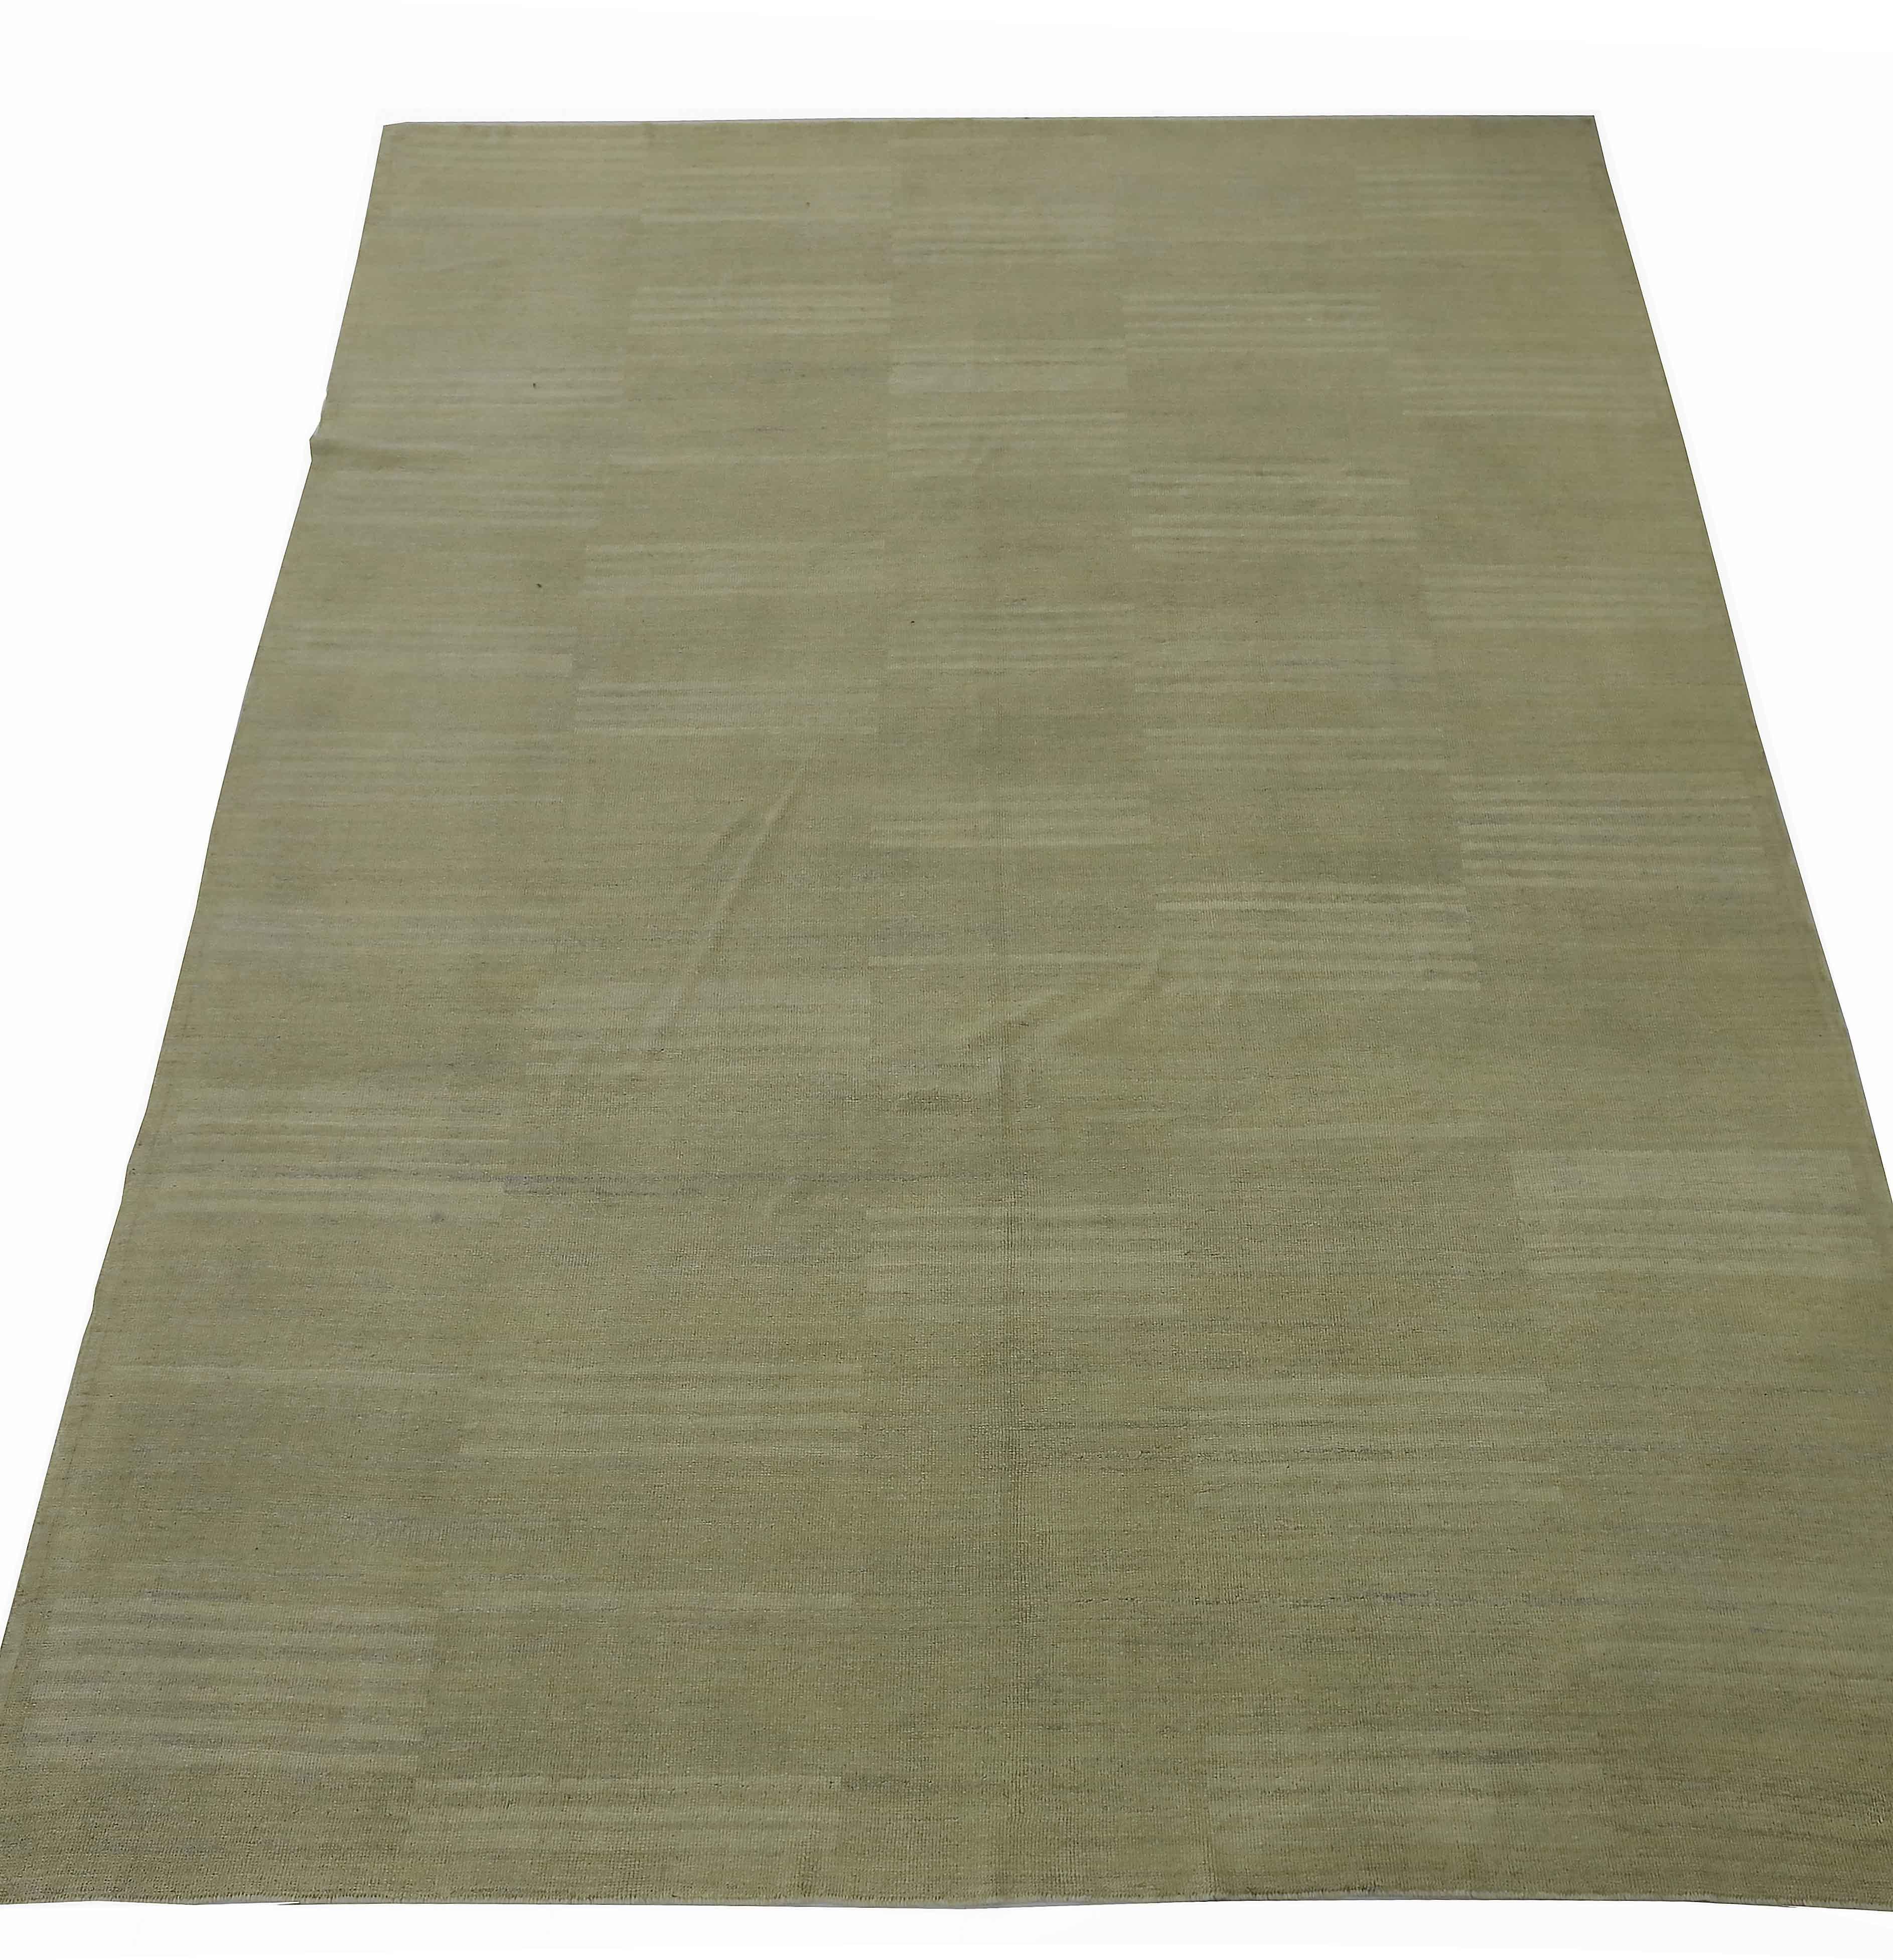 New Persian rug handwoven from the finest sheep’s wool and colored with all-natural vegetable dyes that are safe for humans and pets. It’s a traditional Kilim flat-weave design featuring modern ivory stripes on a green field. It’s a stunning piece